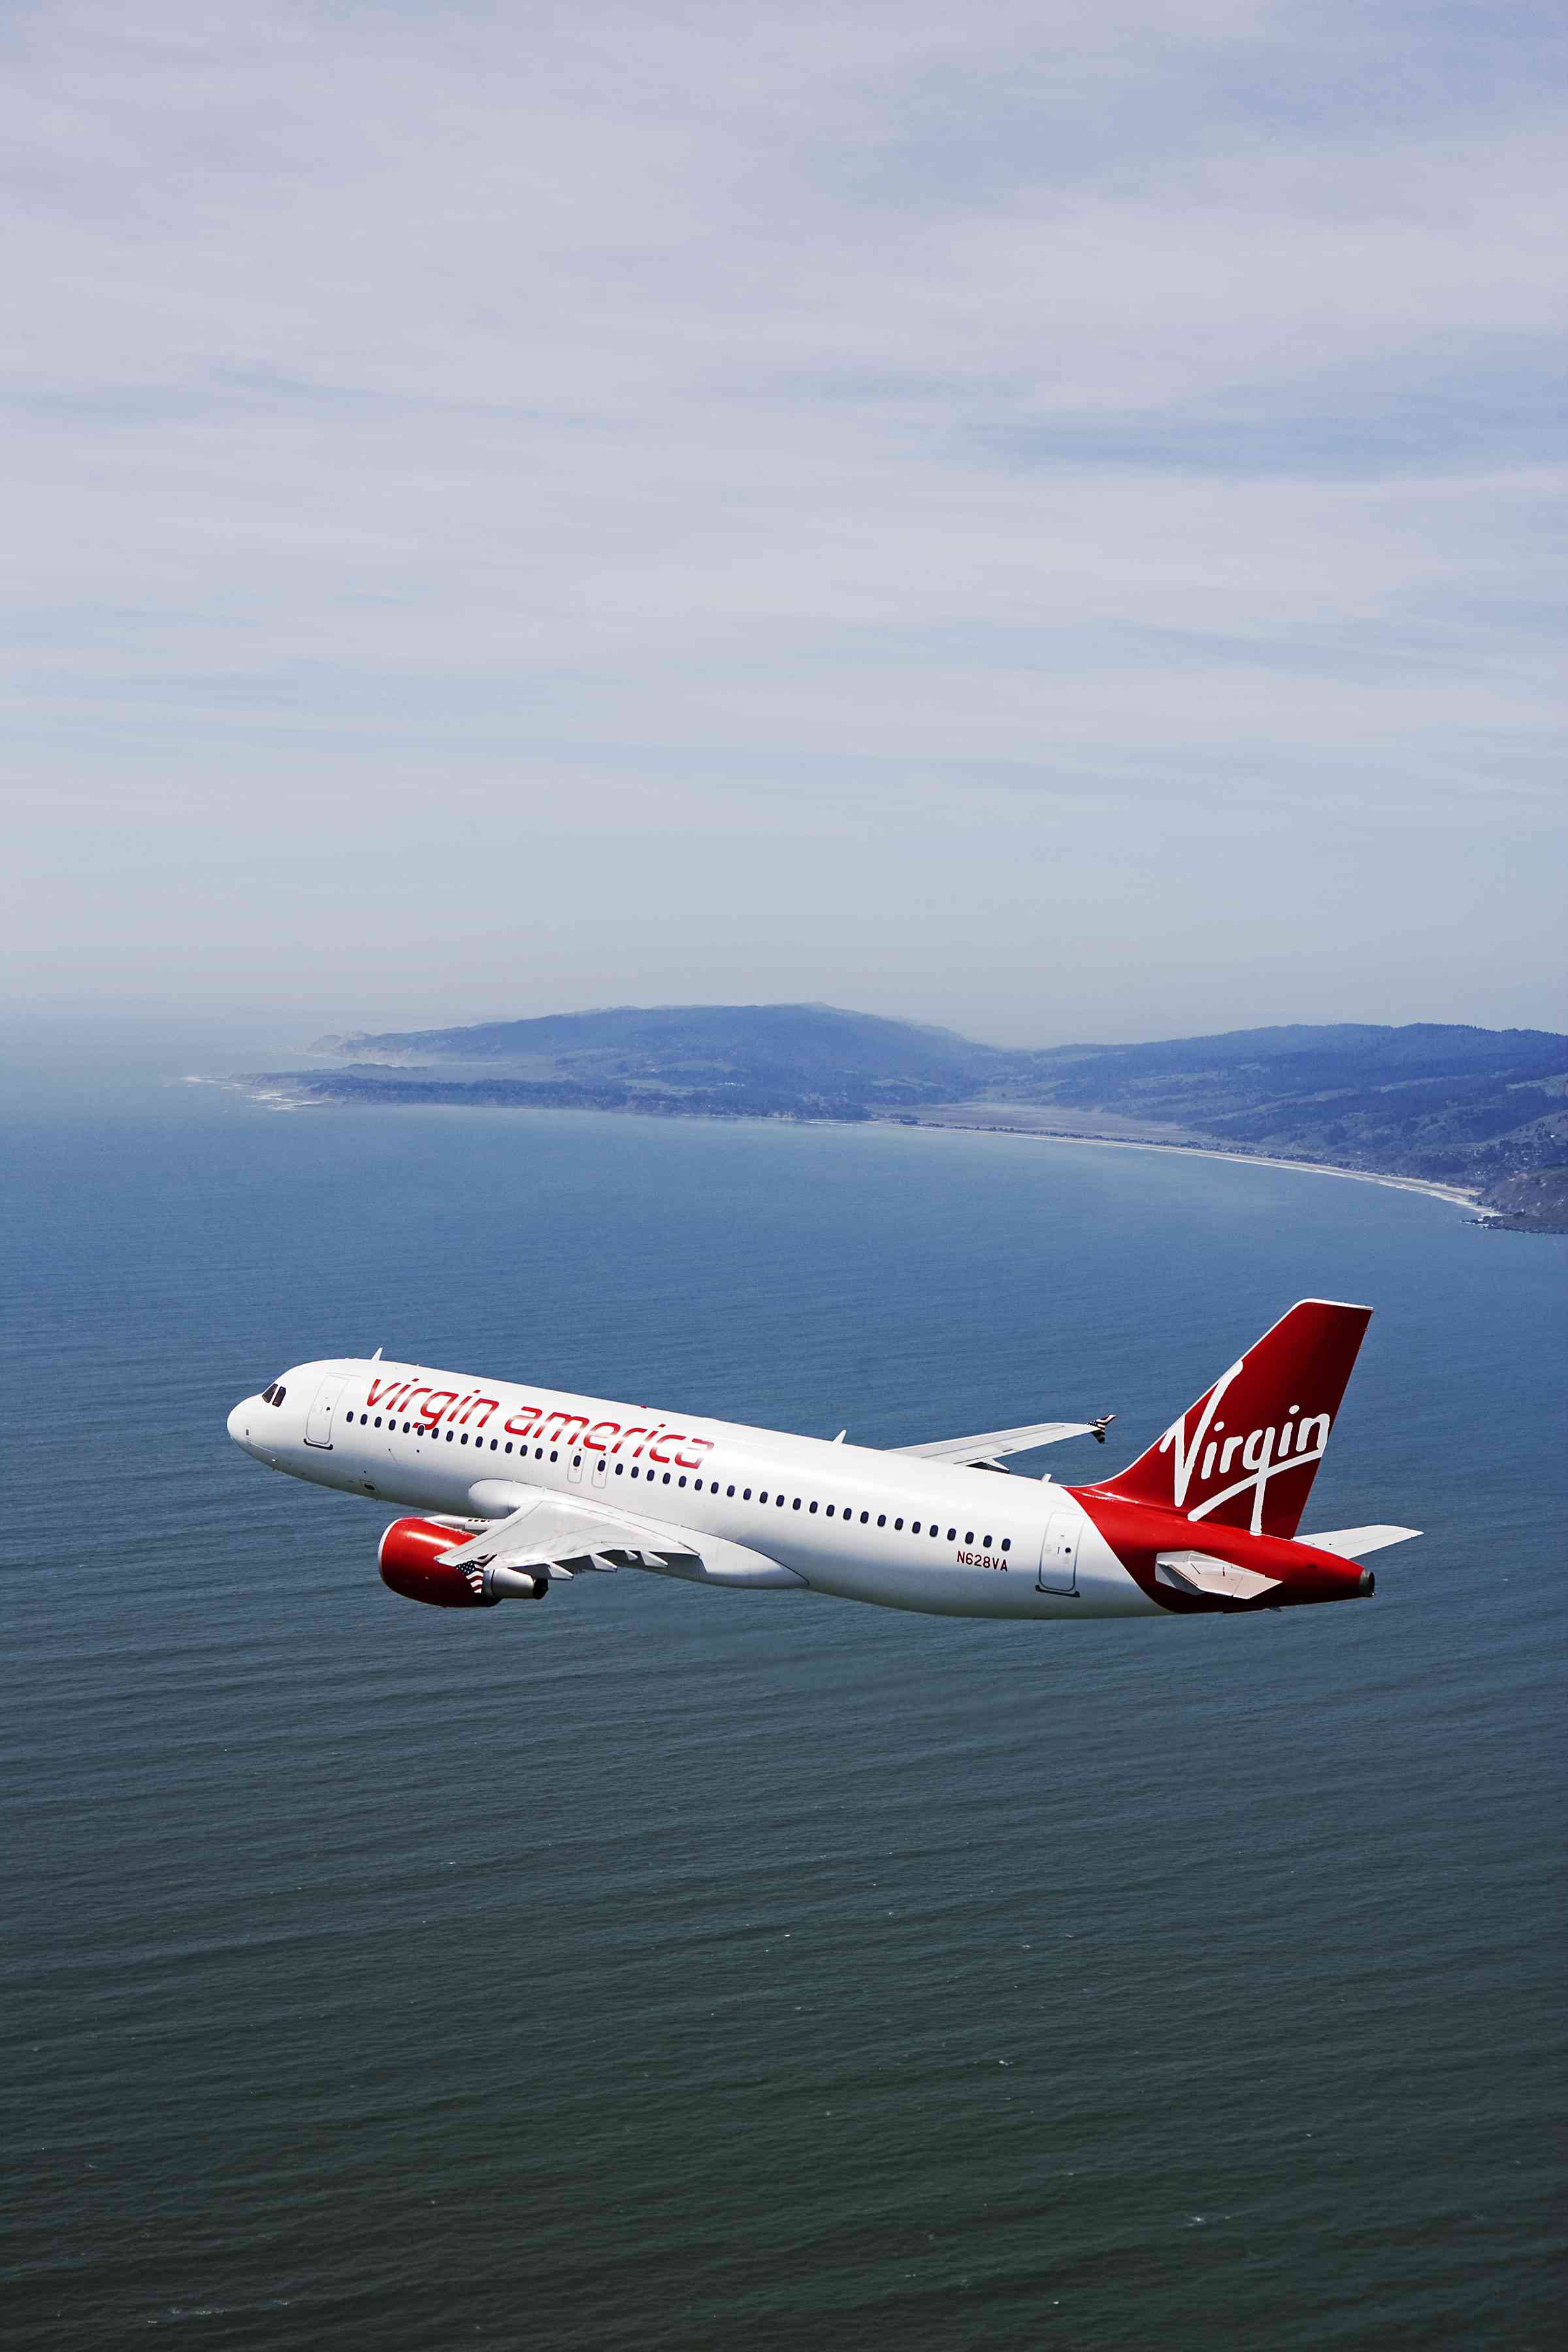 One of the most recent airline service additions at PHOG is Virgin America service to/from both San Francisco and Los Angeles, CA in ETOPS-approved Airbus A-320's. [Photo Credit: mauinow.com]